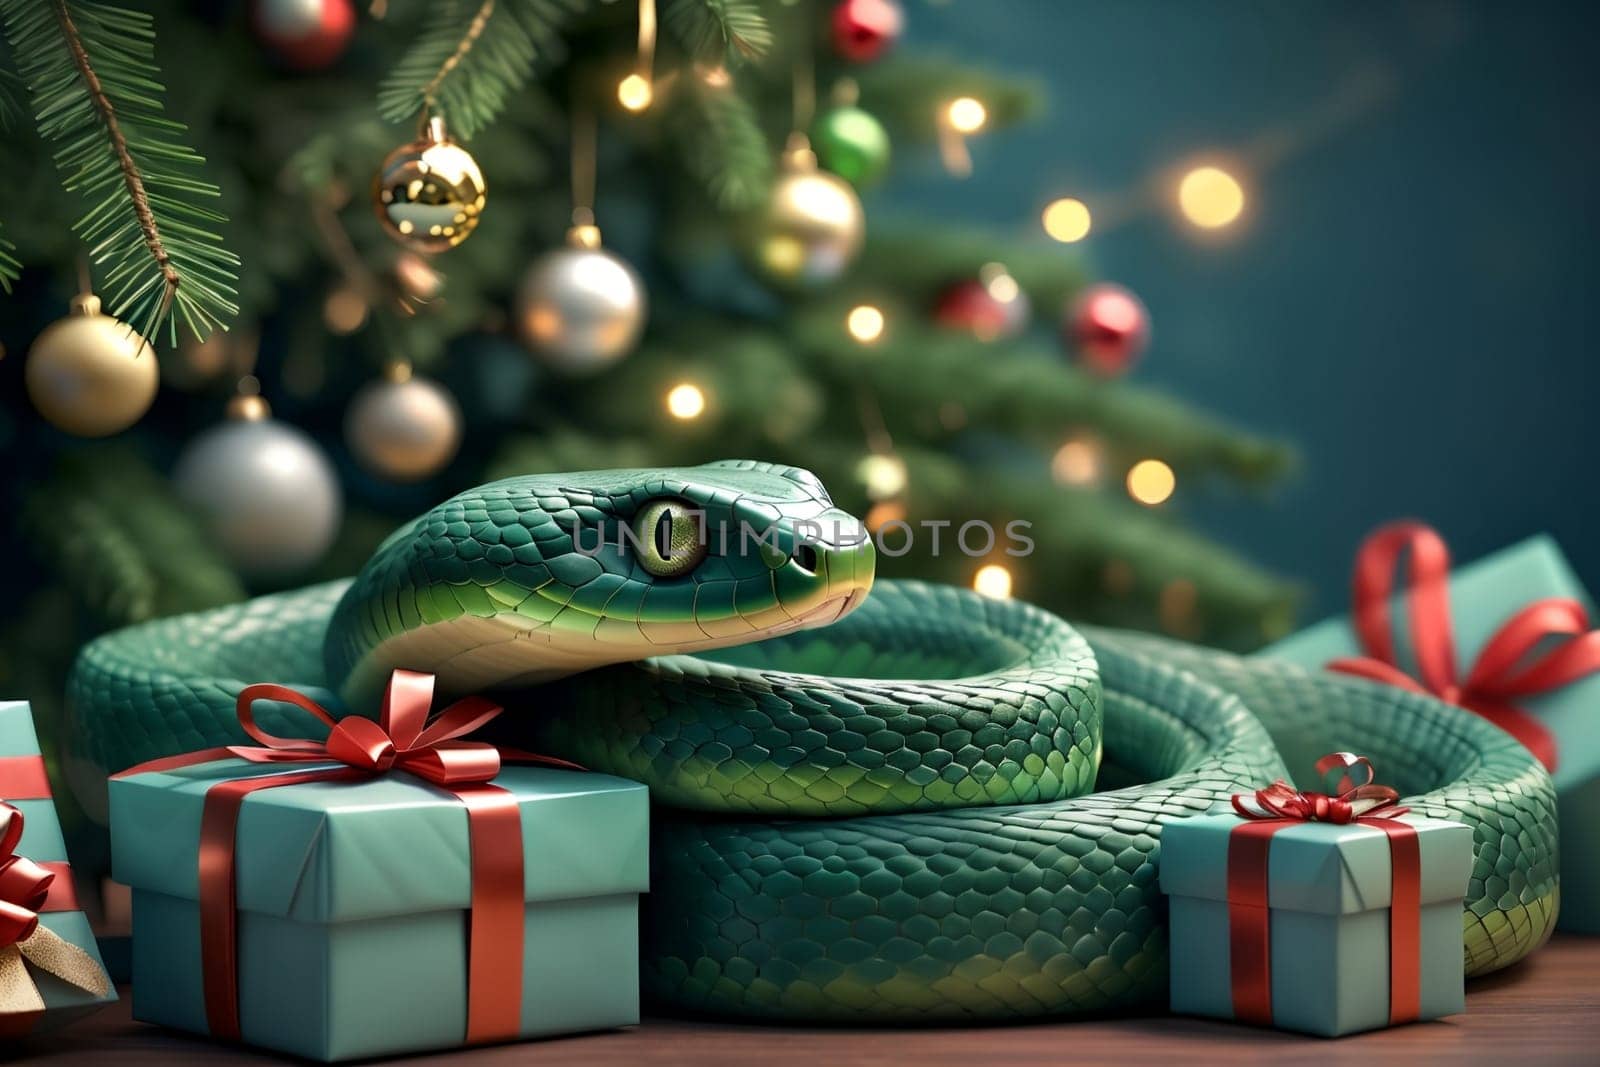 New Year snake with gifts under the Christmas tree, New Year card .